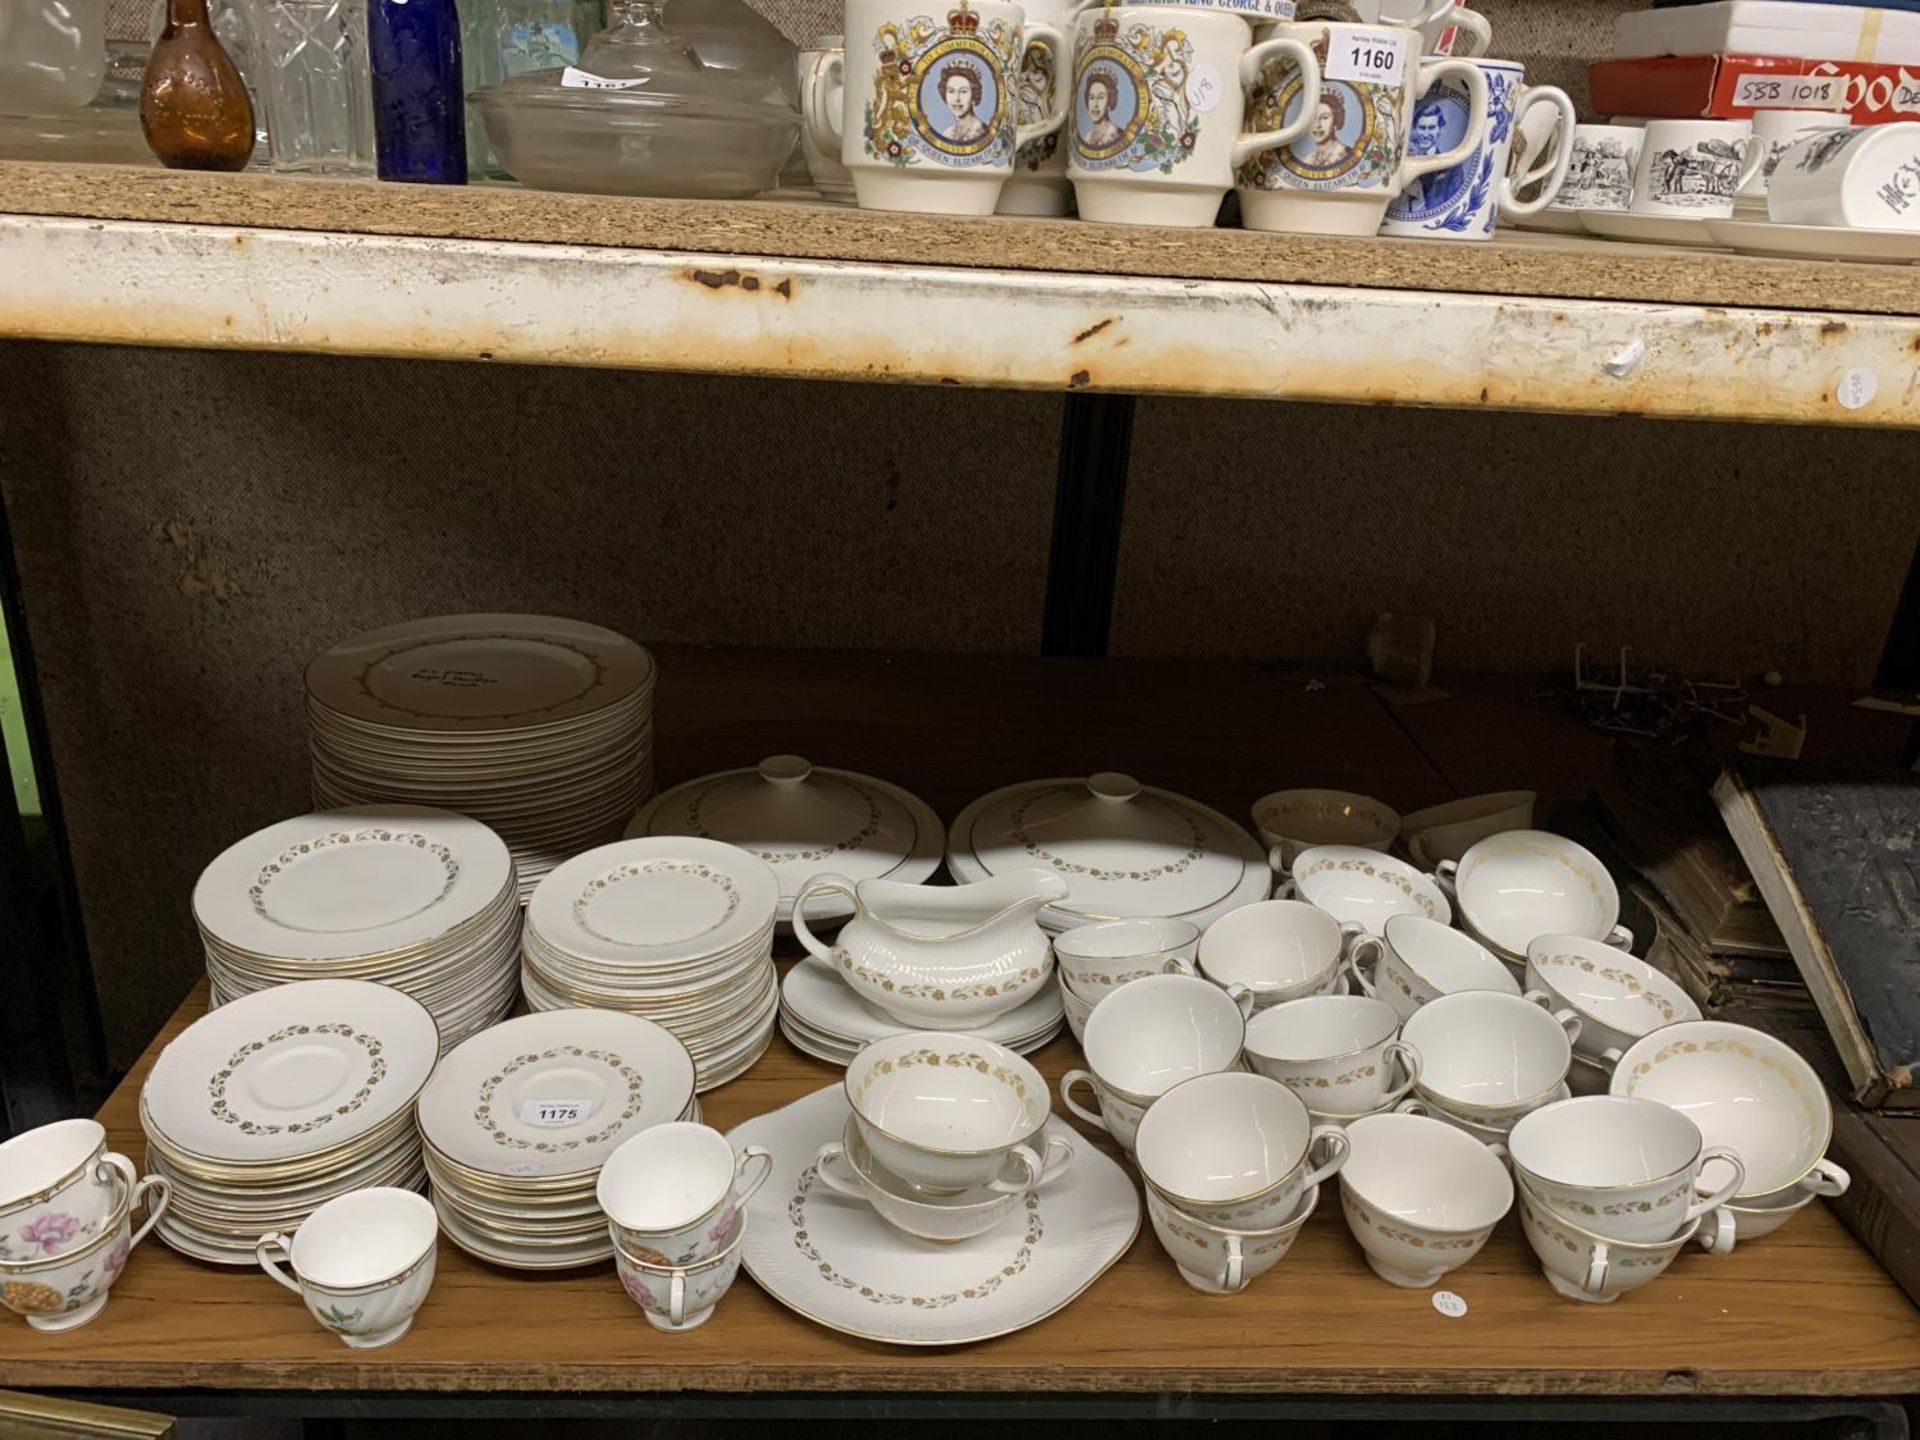 A LARGE QUANTITY OF ROYAL DOULTON 'FAIRFAX' AND 'RONDO' DINNER WARE TO INCLUDE VARIOUS SIZES OF